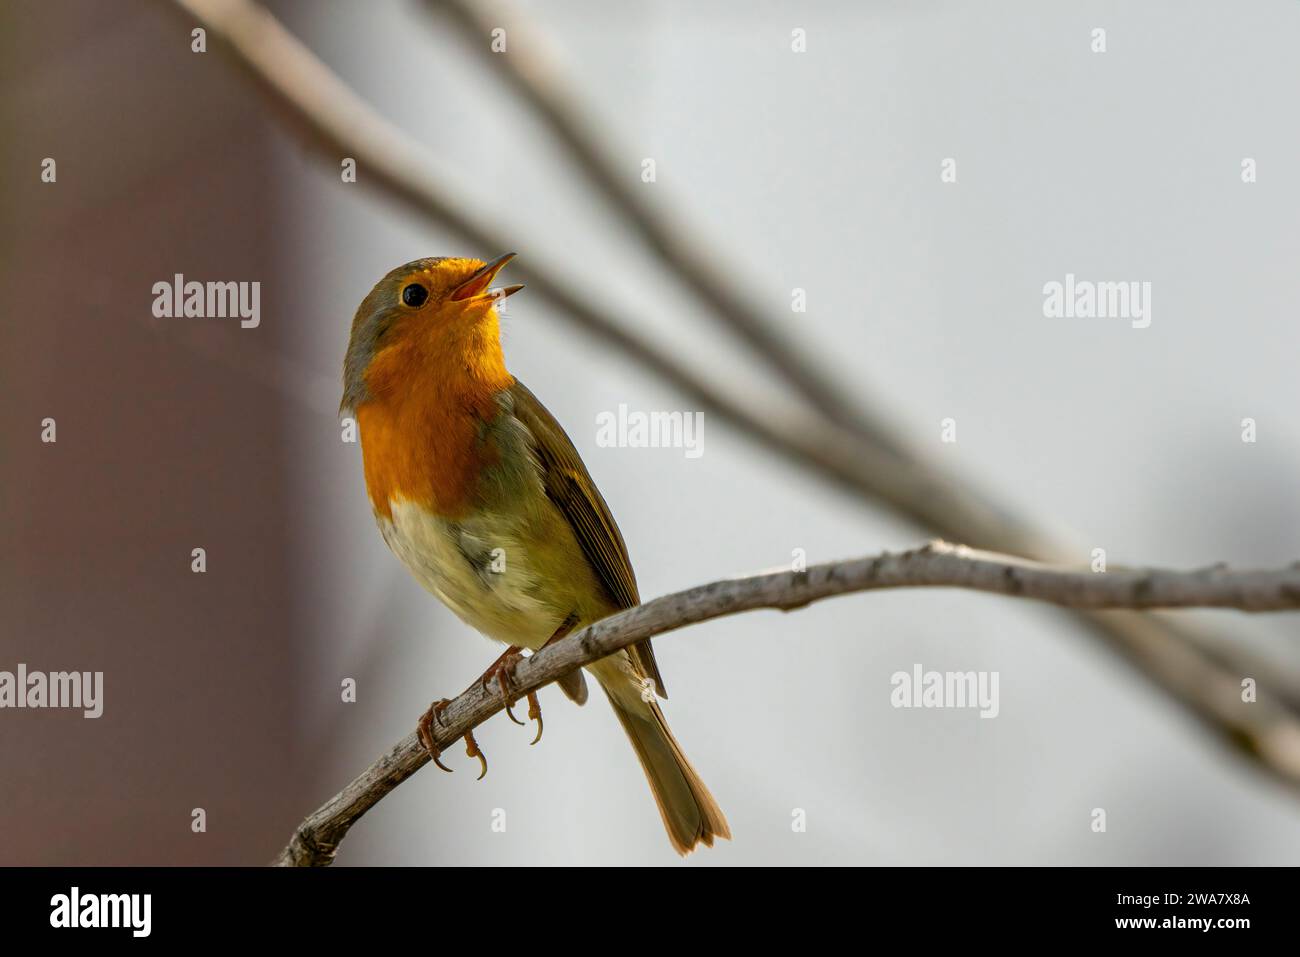 Robin on a branch in nature, photo as a background, digital image Stock Photo